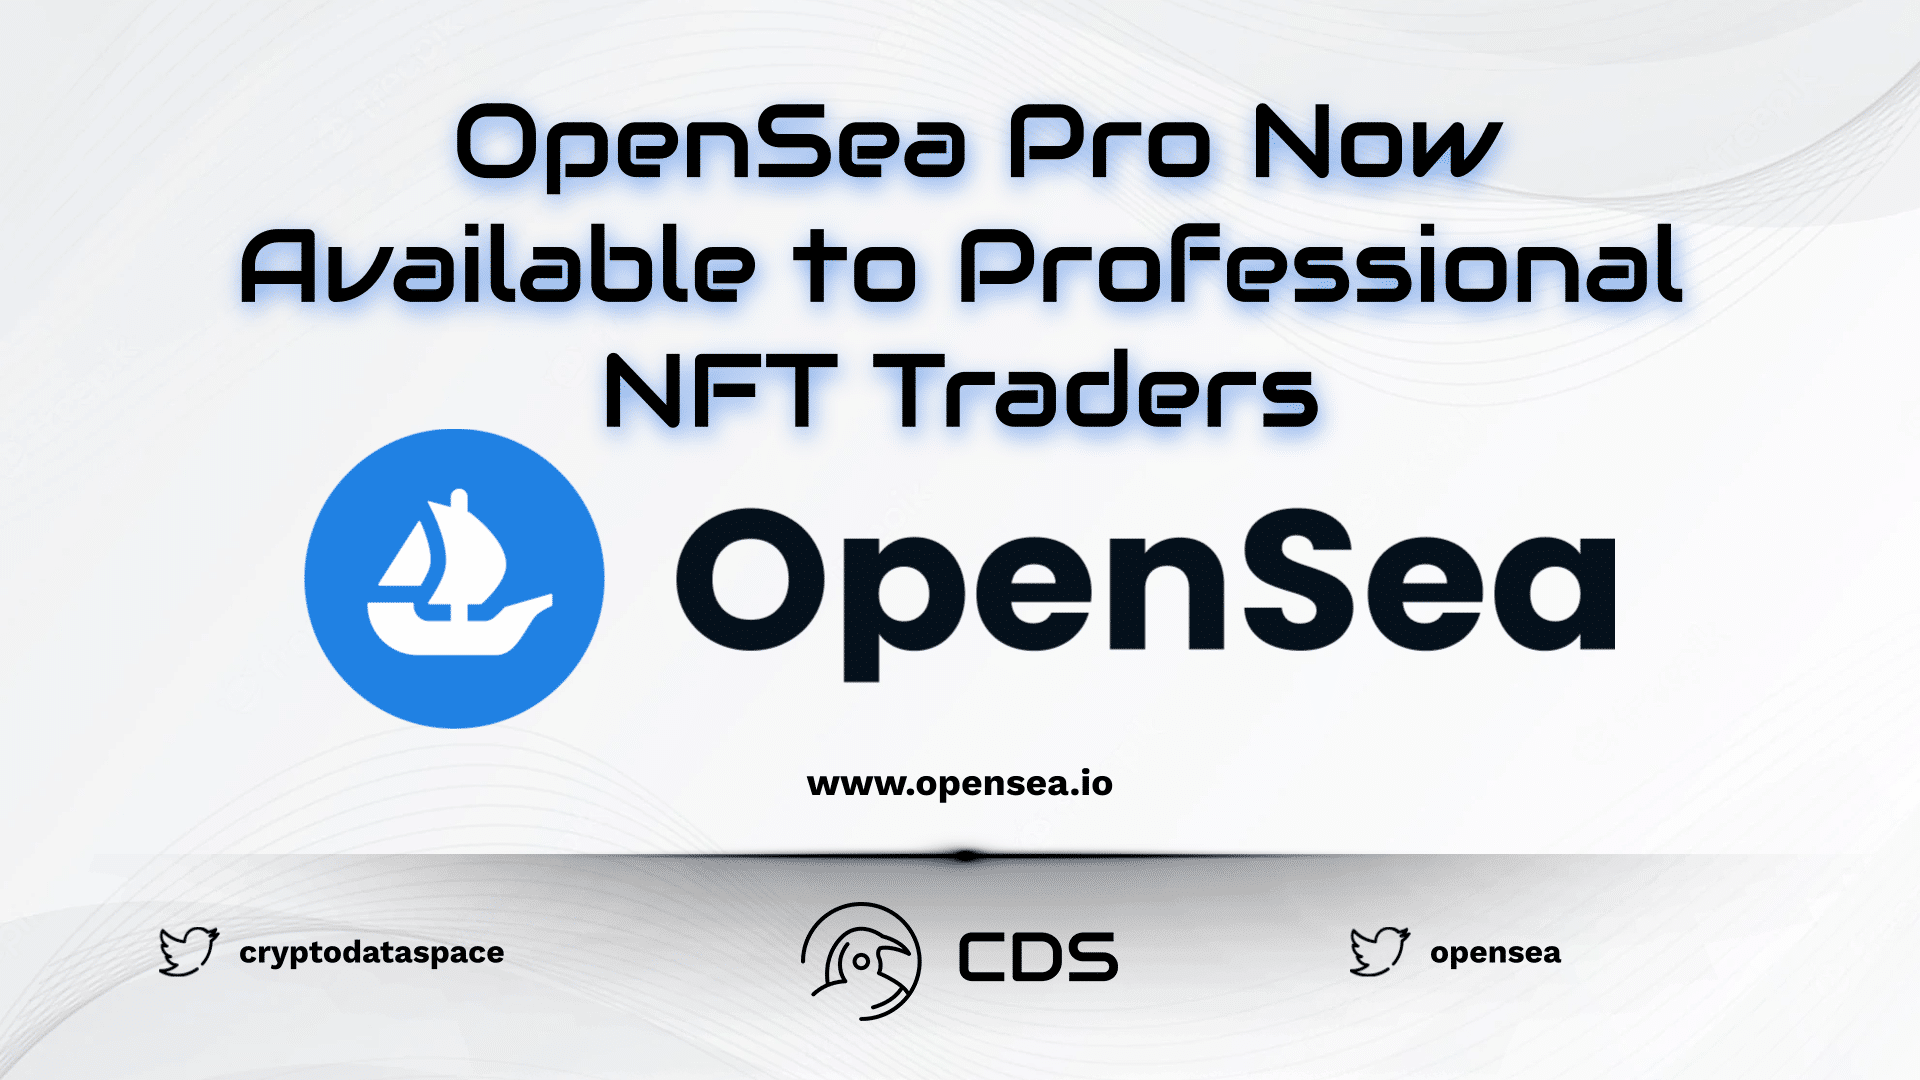 OpenSea Pro Now Available to Professional NFT Traders